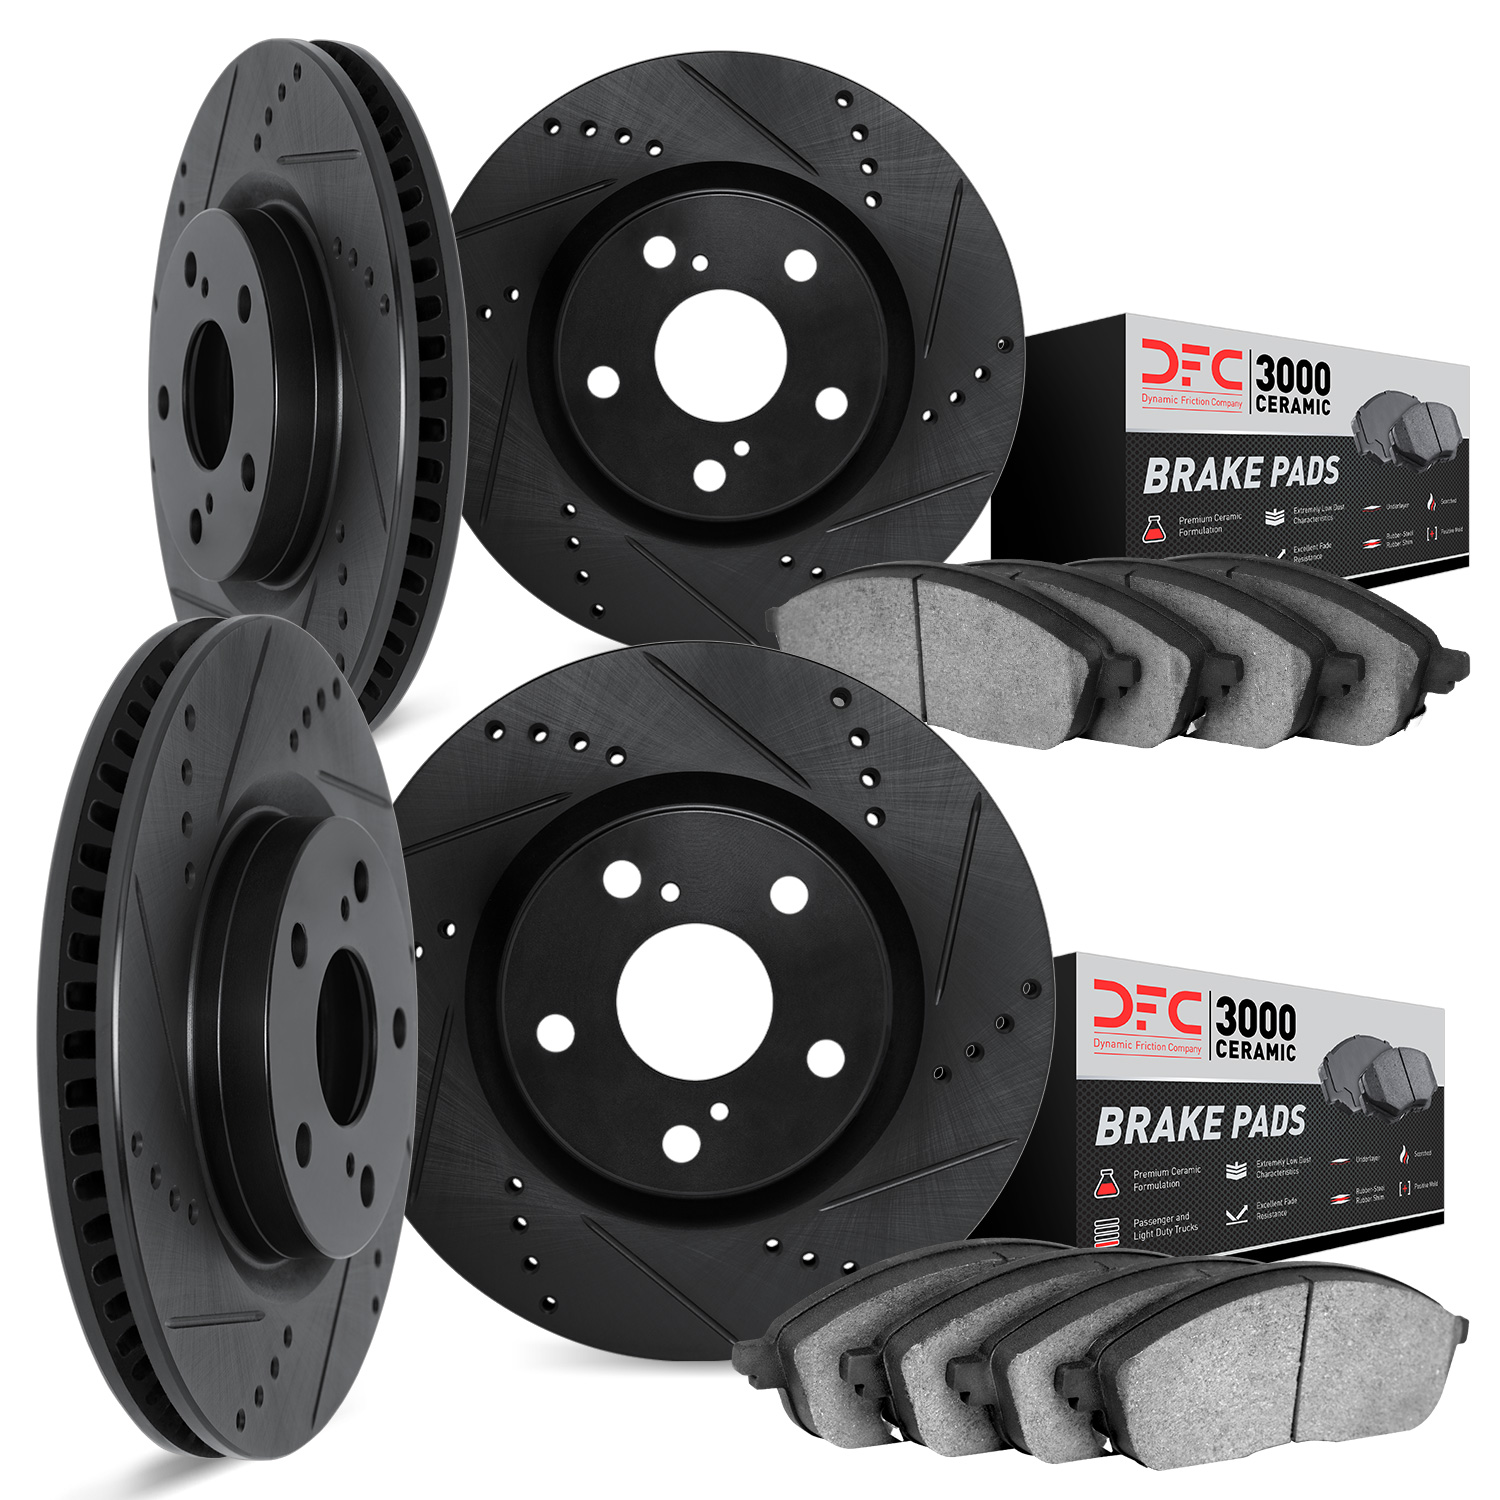 8304-31090 Drilled/Slotted Brake Rotors with 3000-Series Ceramic Brake Pads Kit [Black], 2013-2020 BMW, Position: Front and Rear